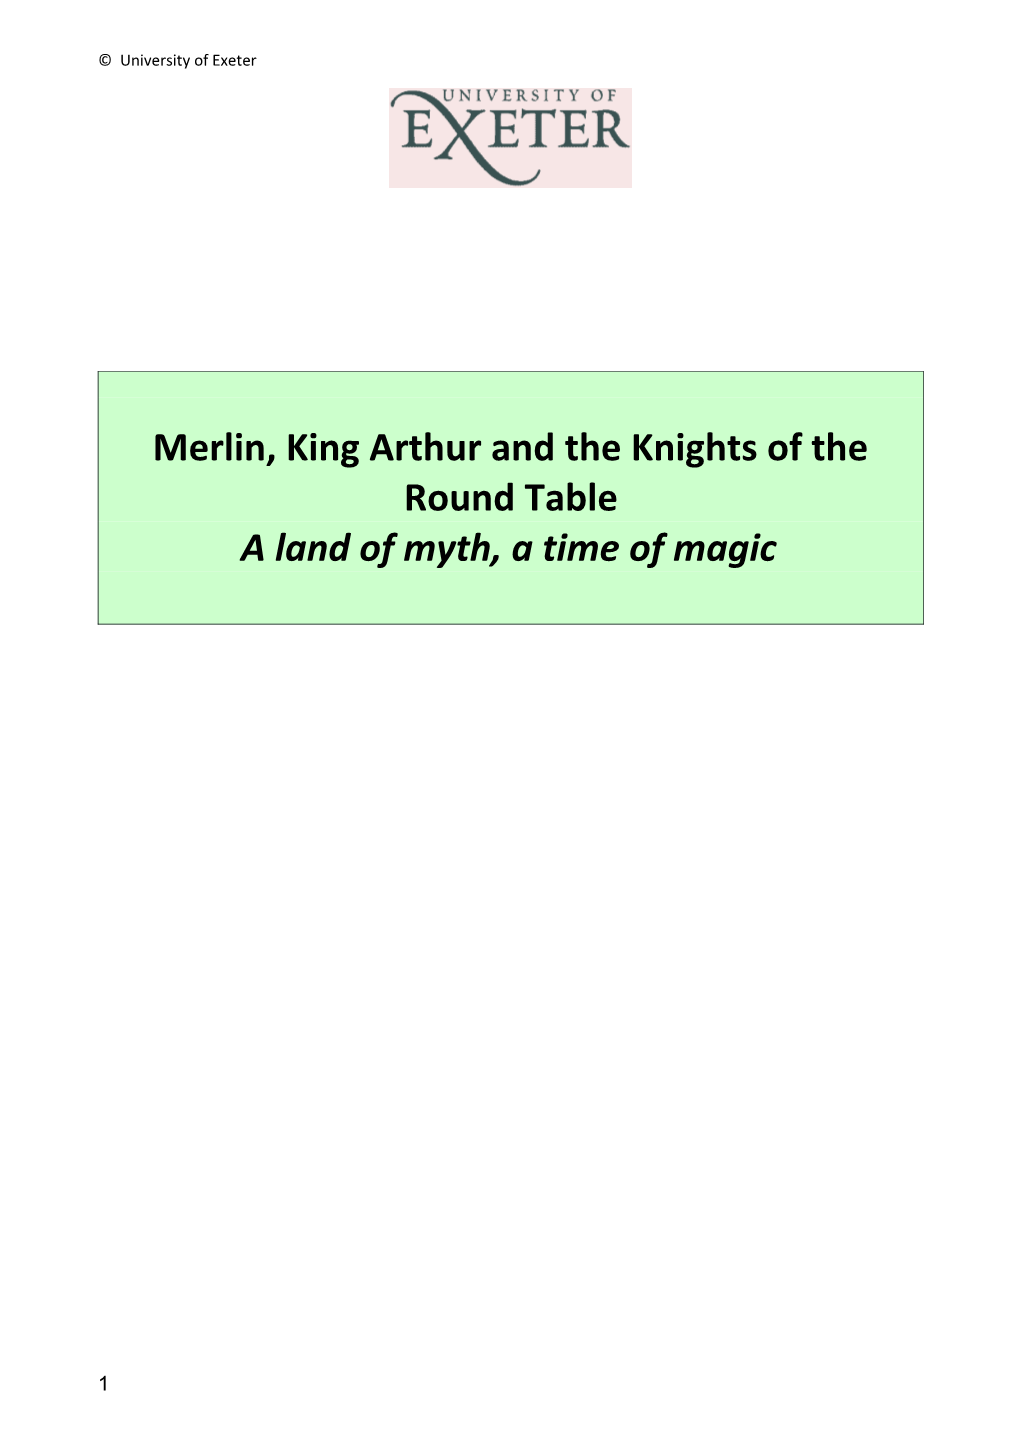 Merlin, King Arthur and the Knights of the Round Table